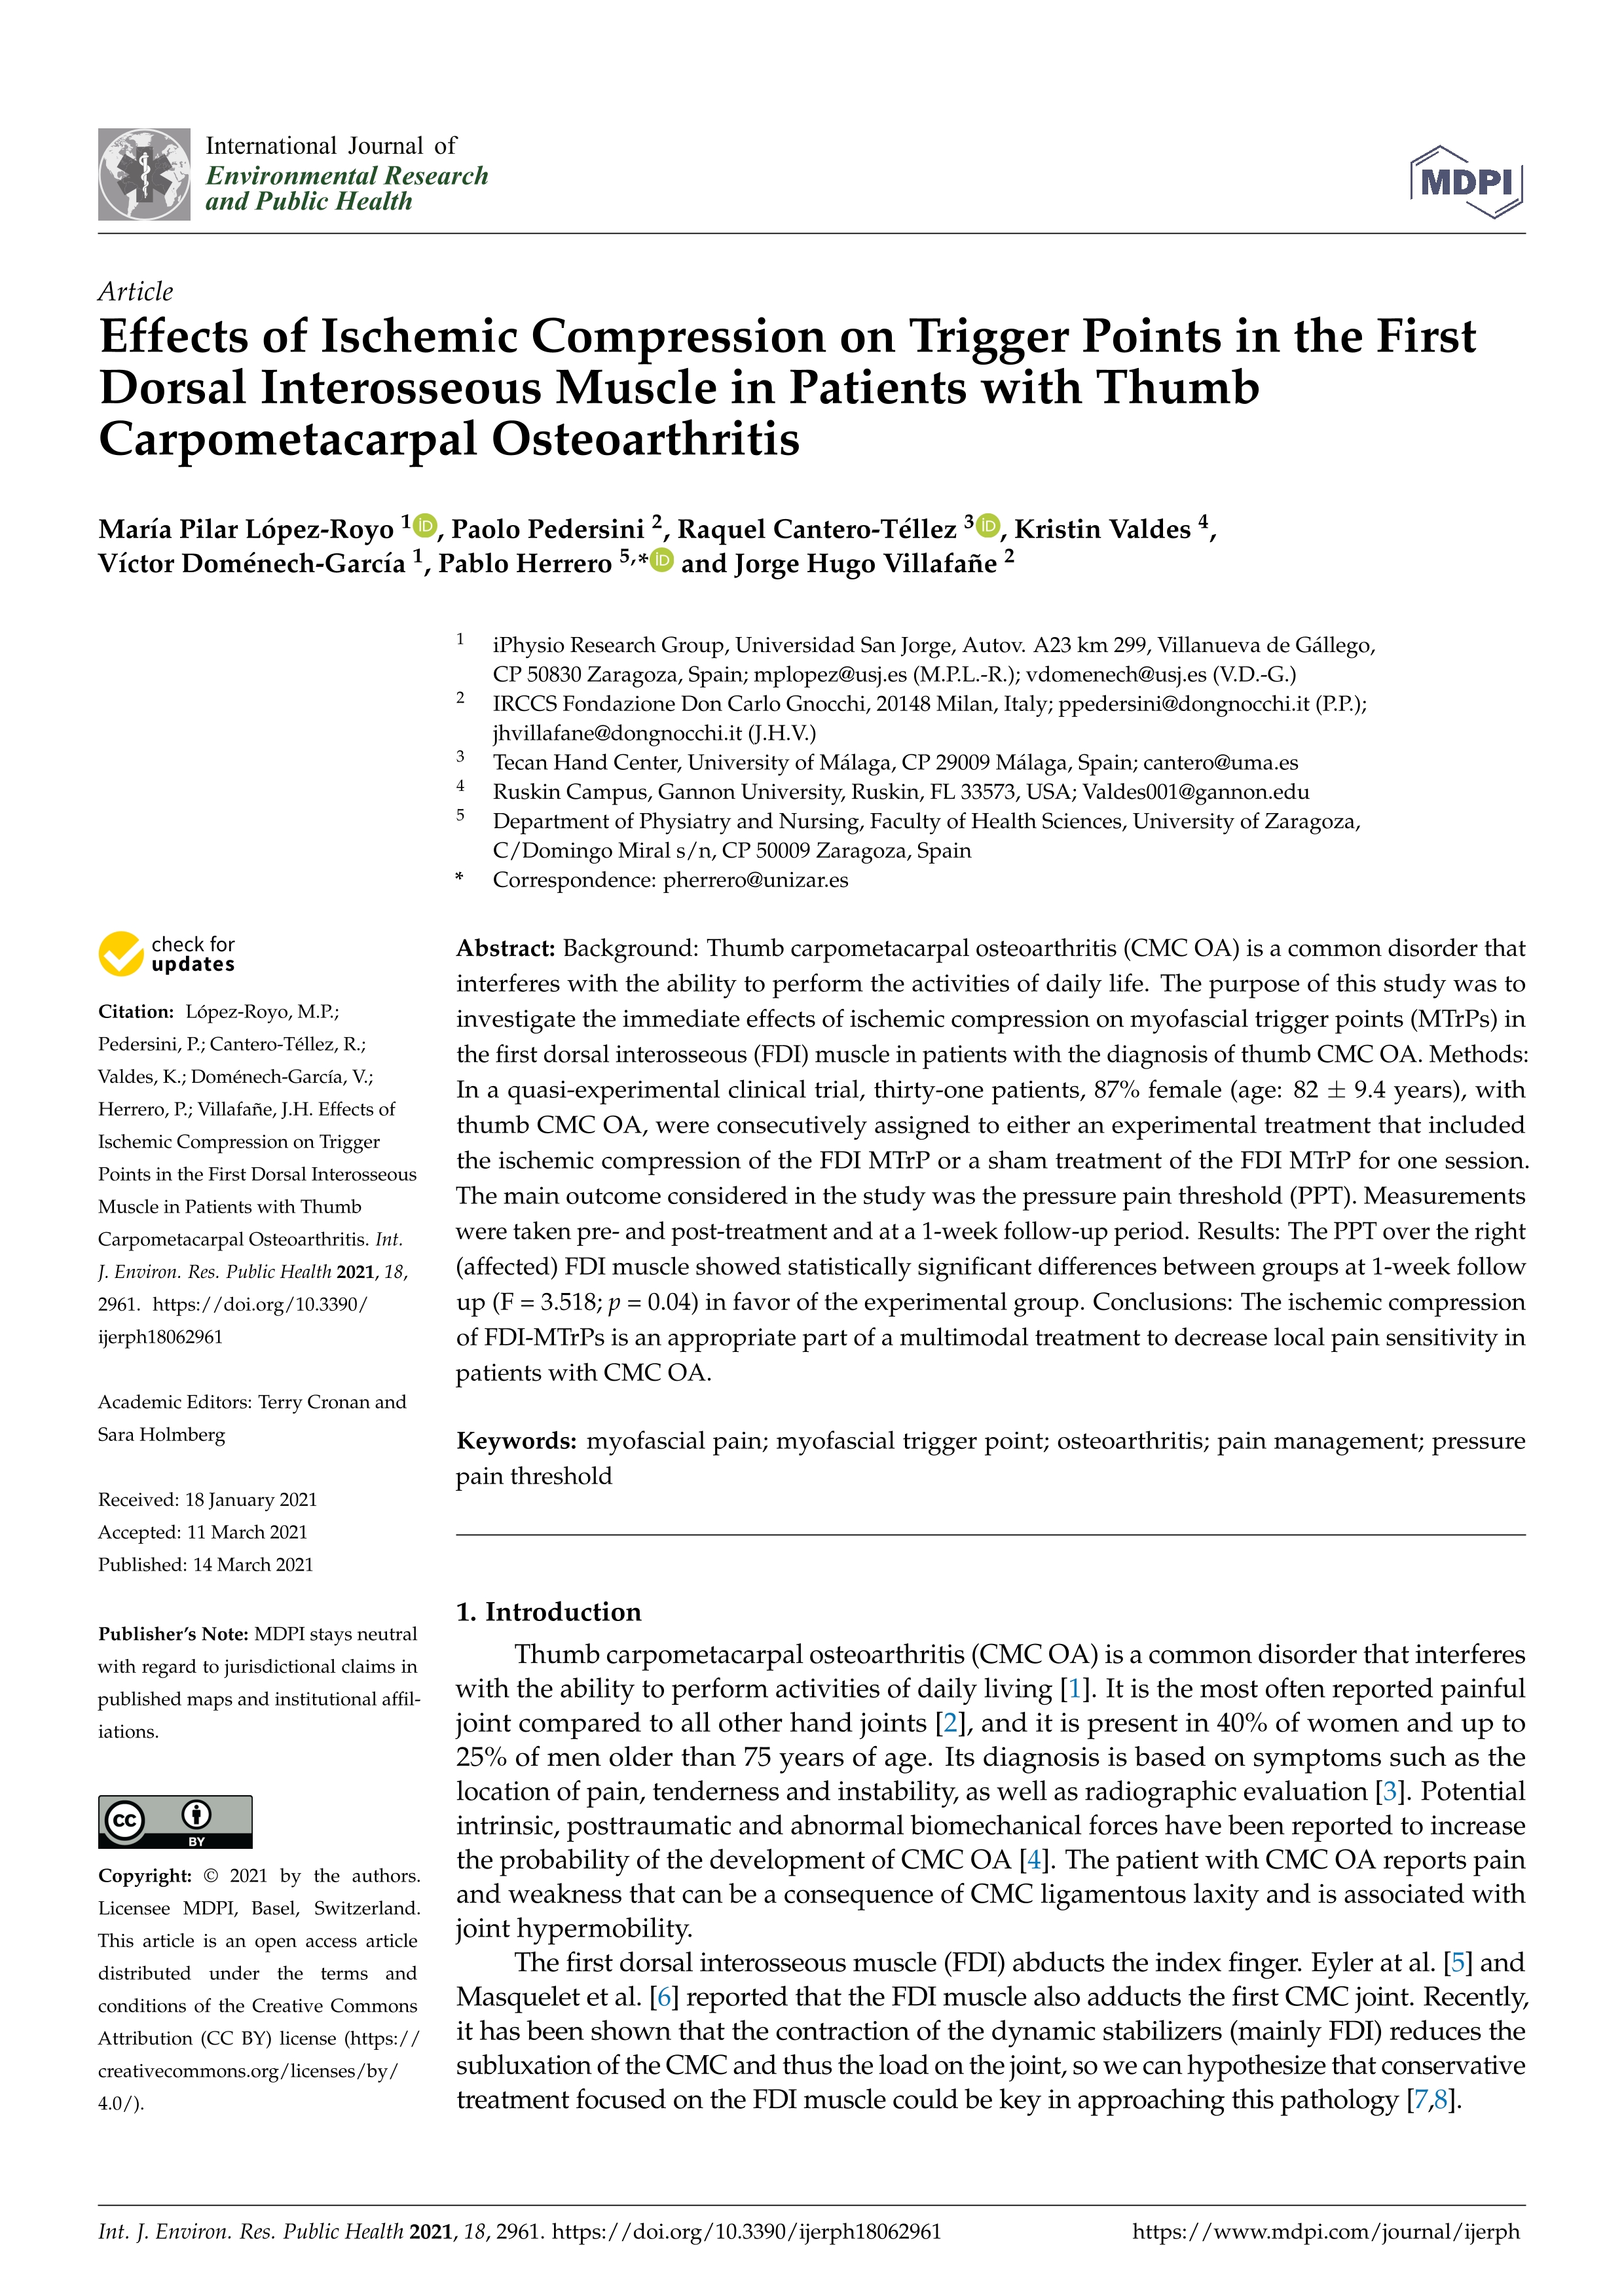 Effects of ischemic compression on trigger points in the first dorsal interosseous muscle in patients with thumb carpometacarpal osteoarthritis